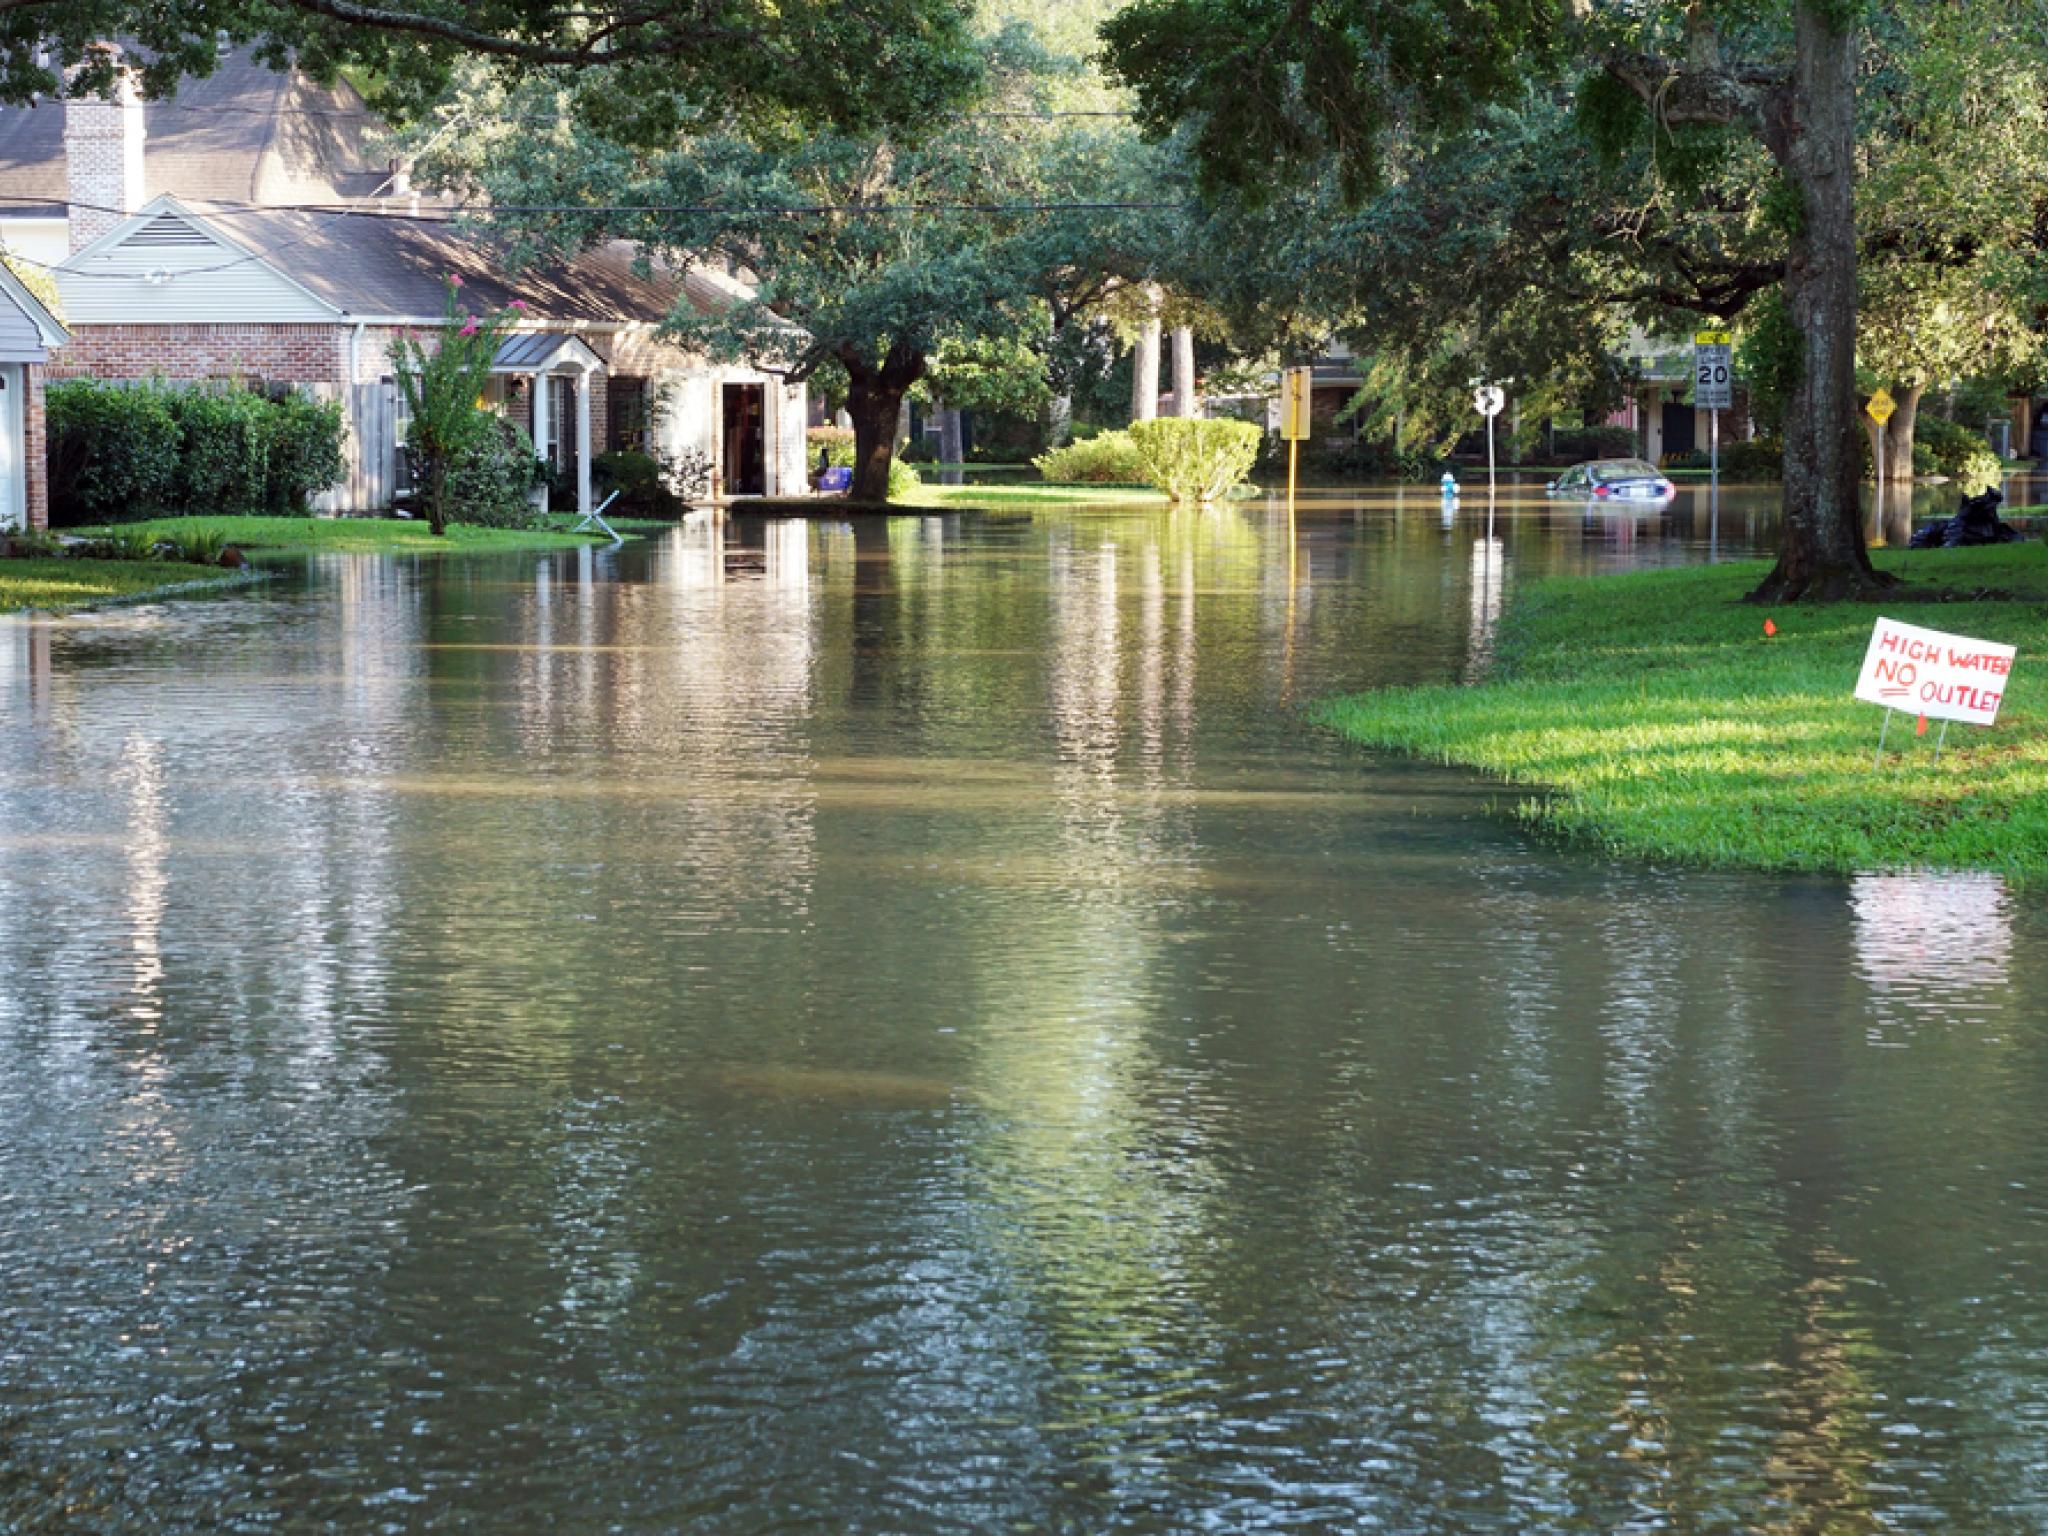  south-florida-grapples-with-rising-flood-waters-what-are-the-implications-for-insurance-sector 